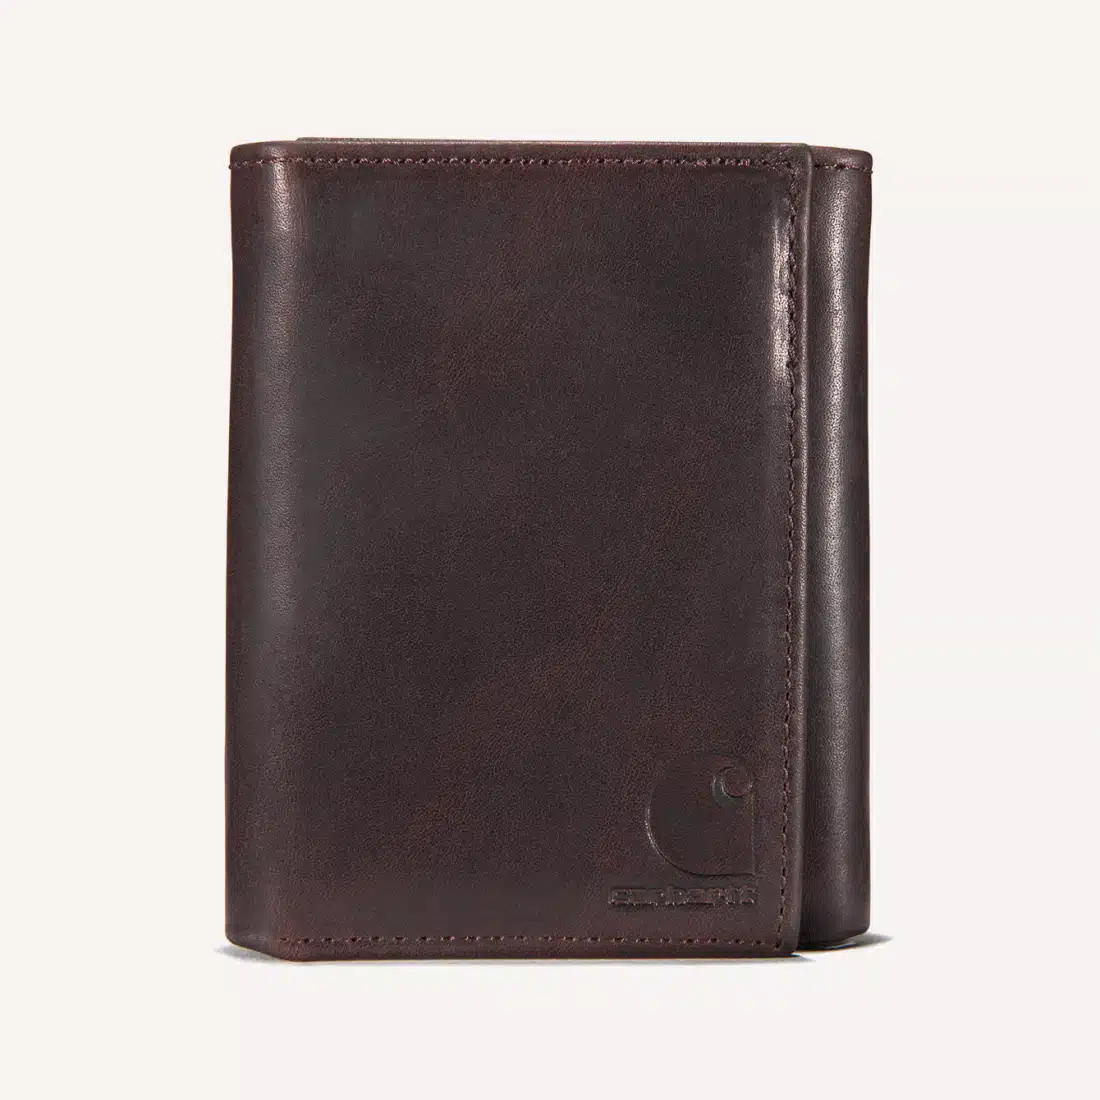 Carhartt Trifold Wallet in Leather